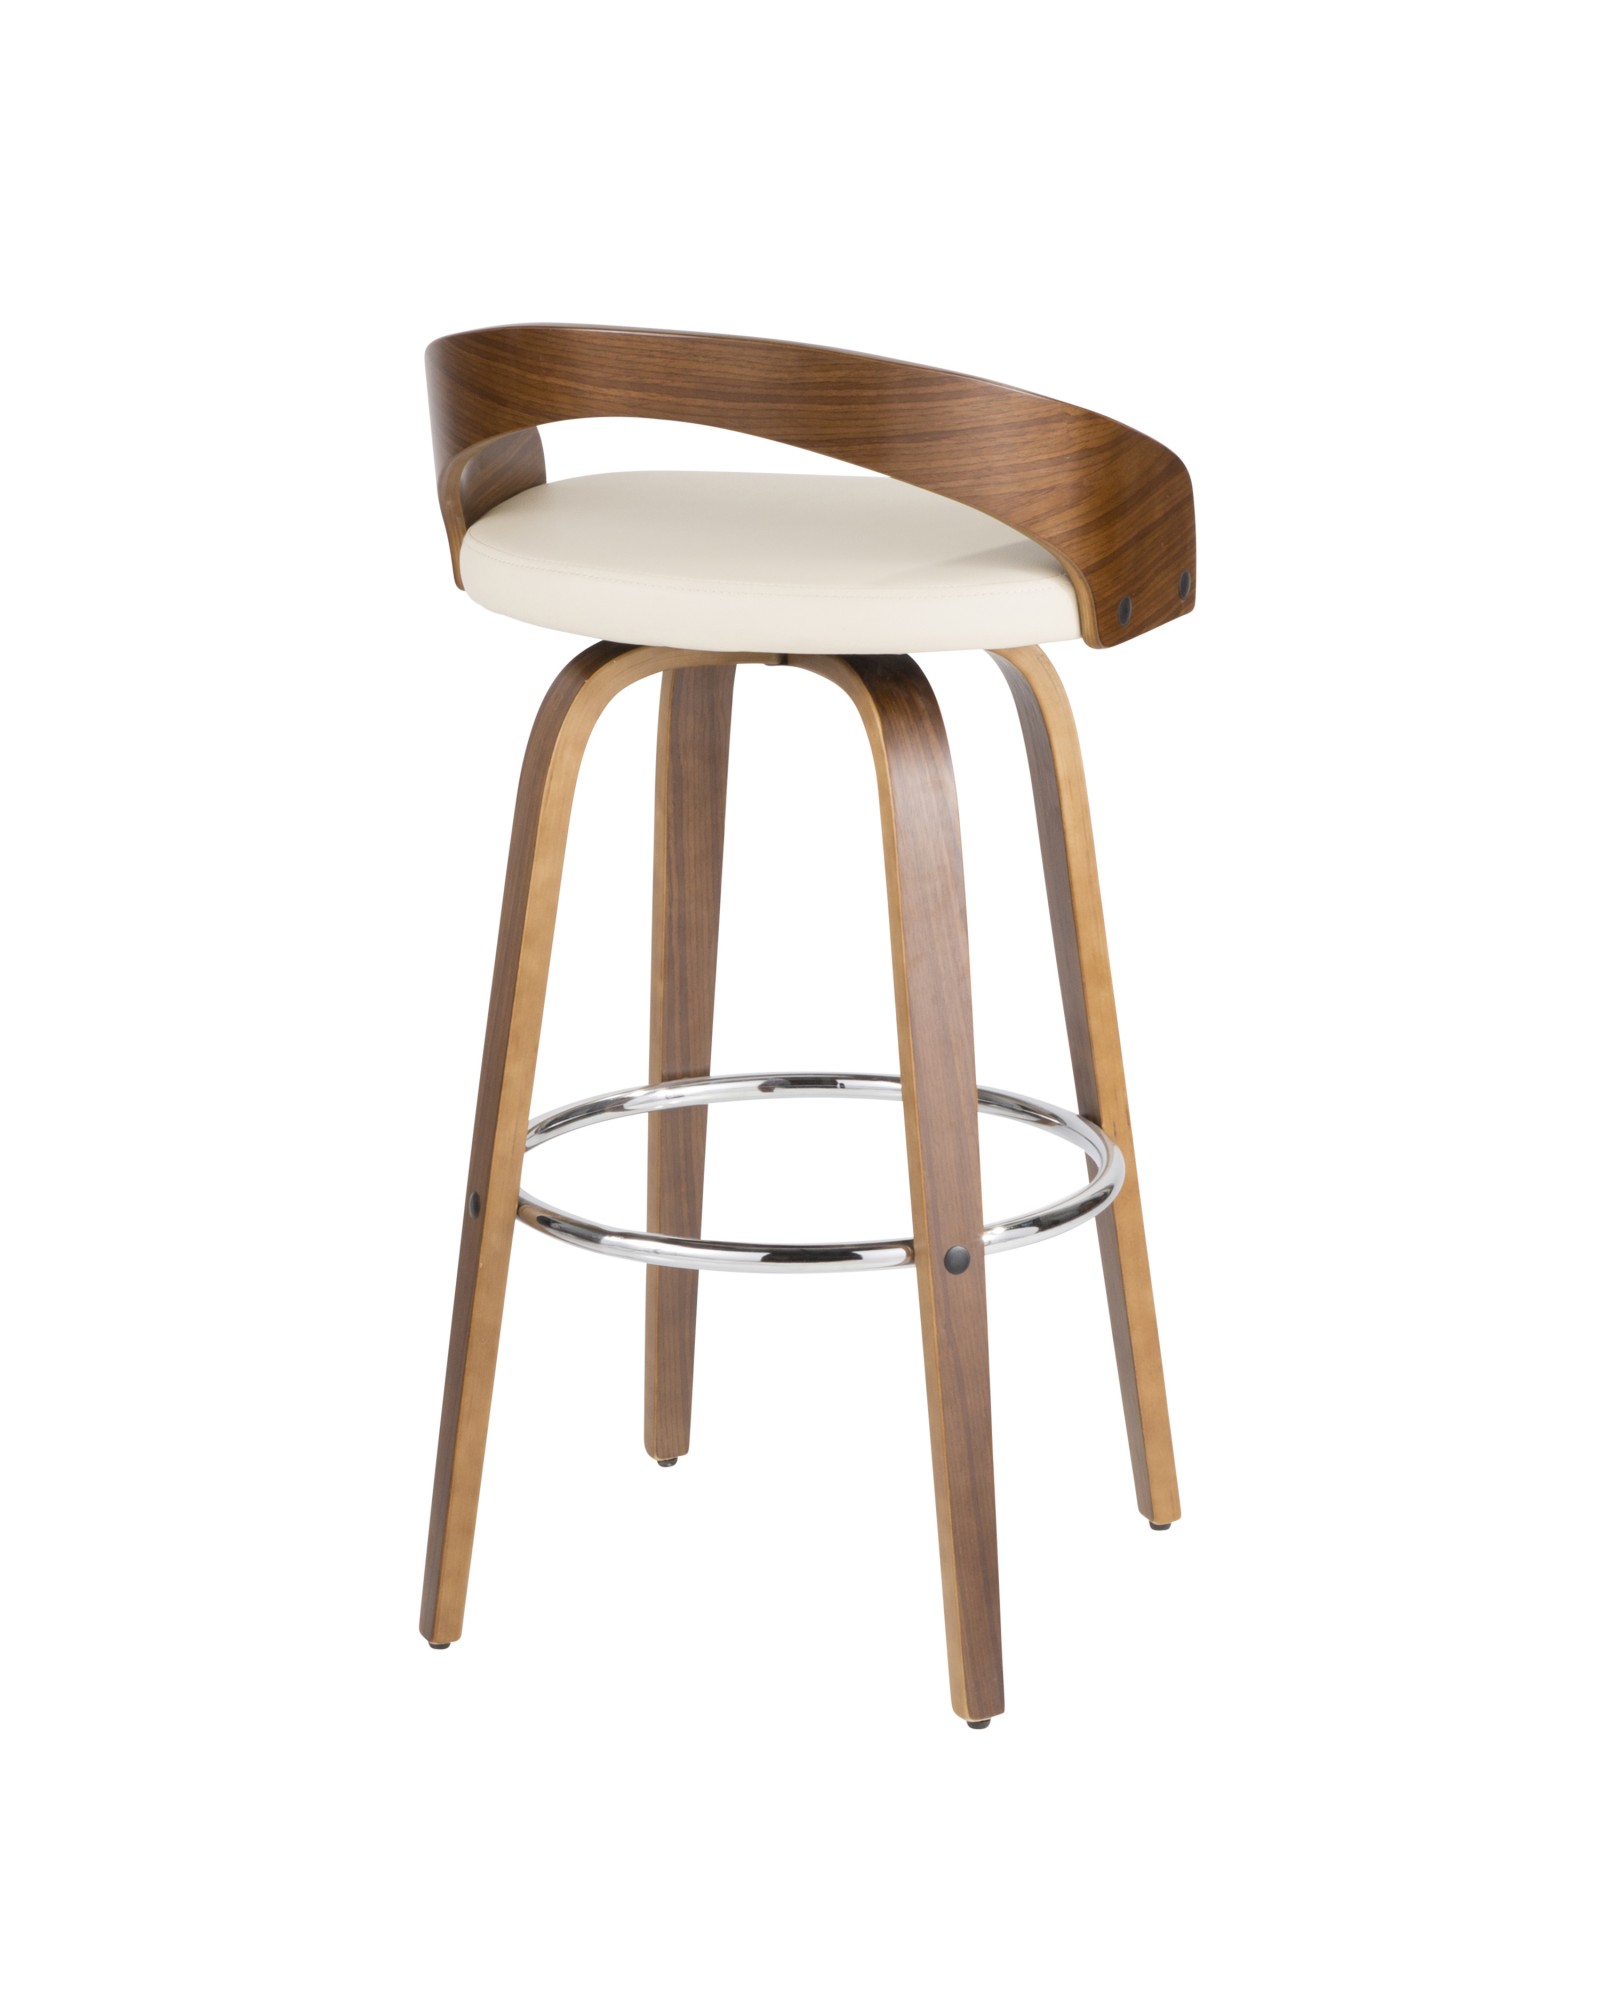 Grotto Mid-Century Modern Barstool in Walnut and Cream Faux Leather